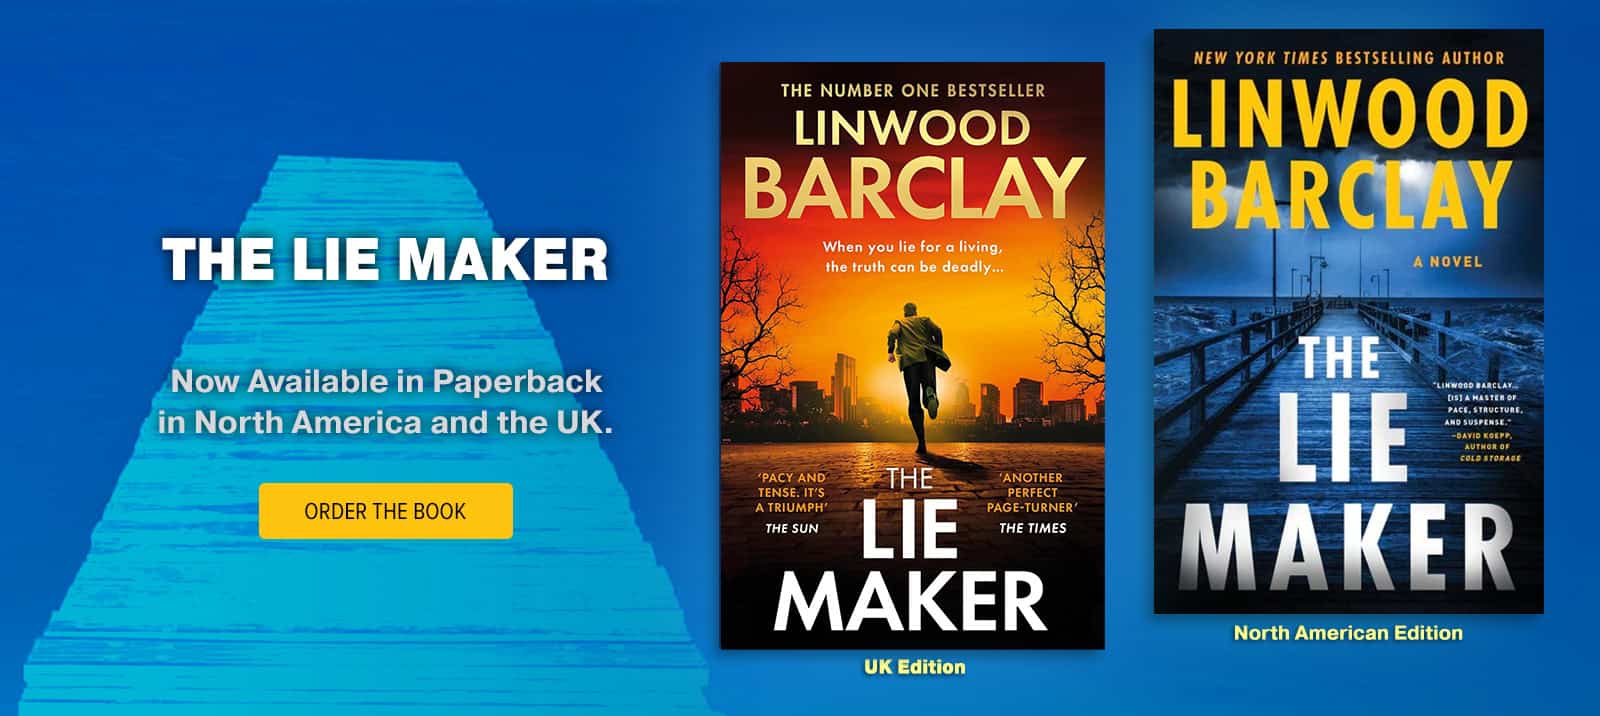 The Lie Maker from Linwood Barclay